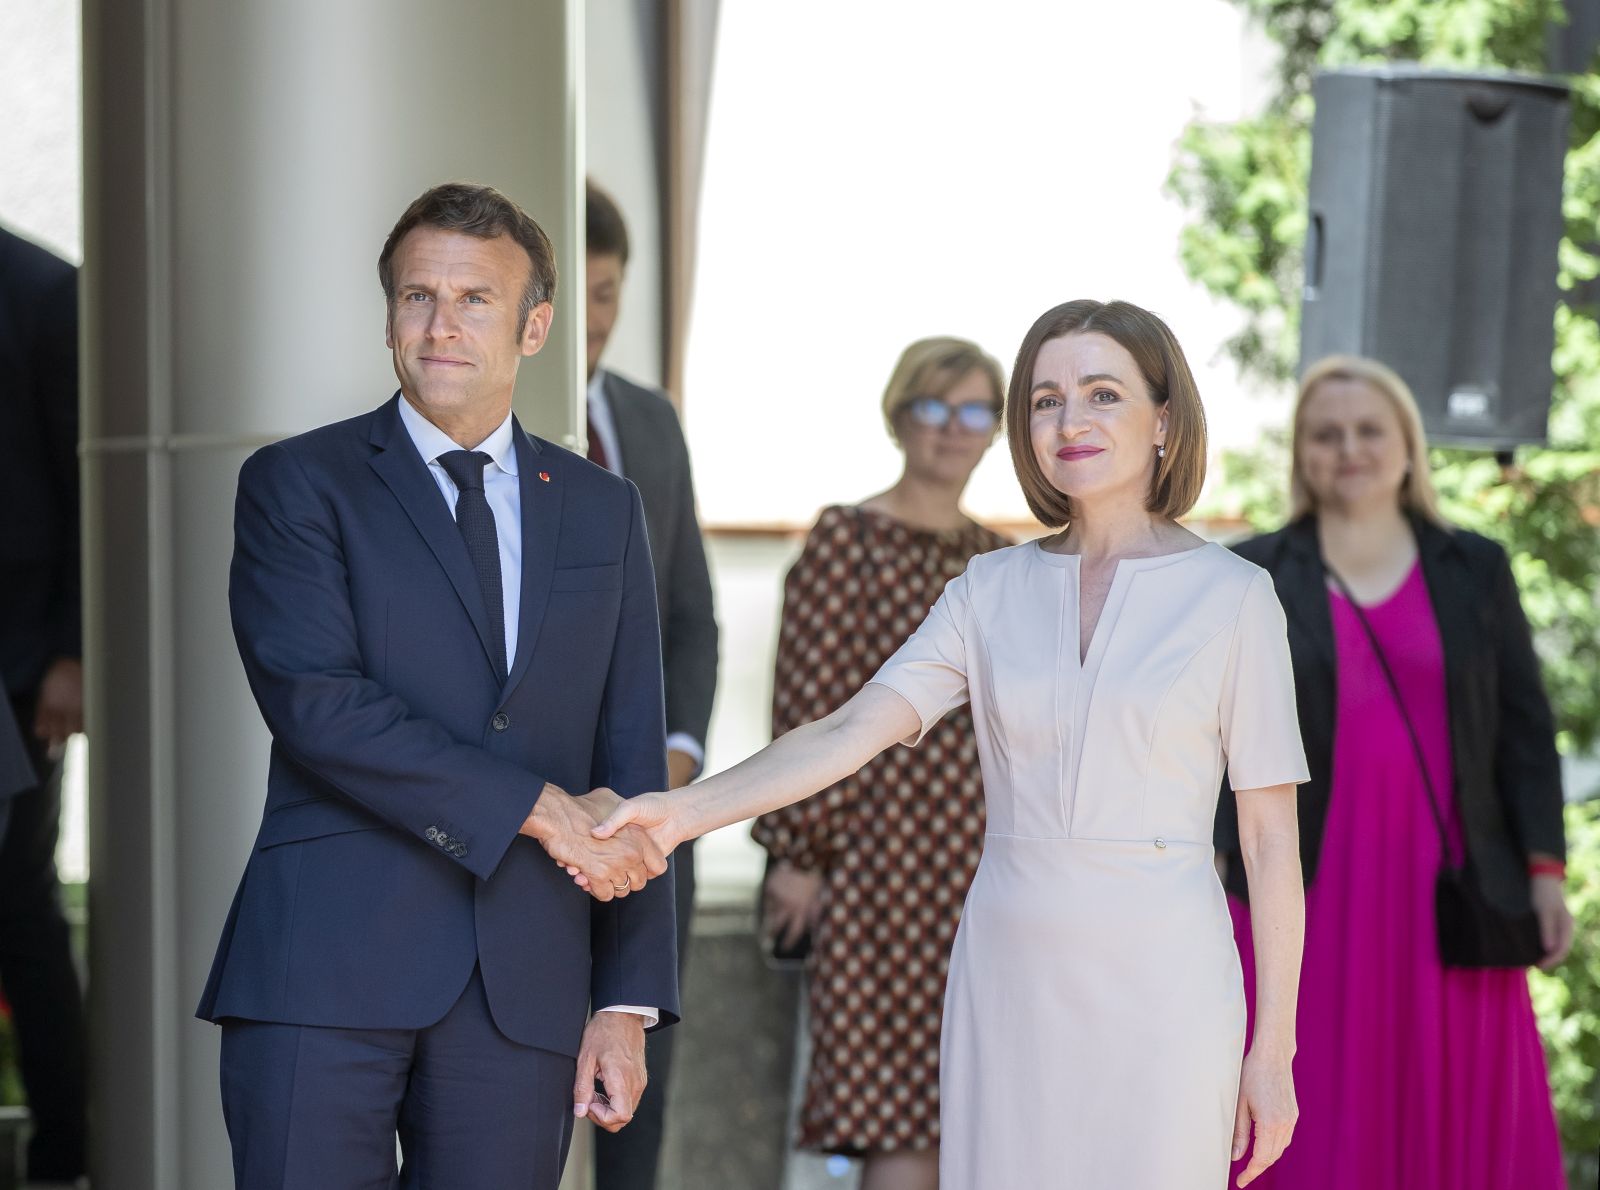 epa10014241 President of Moldova Maia Sandu (R,front) and French President Emmanuel Macron (L,front) shake hands at the State Residence in Chisinau, Moldova, 15 June 2022. Macron visits the Republic of Moldova on 15 June after meeting with troops stationed in Romania with the NATO Response Force, as part of an official visit to the region.  EPA/DUMITRU DORU